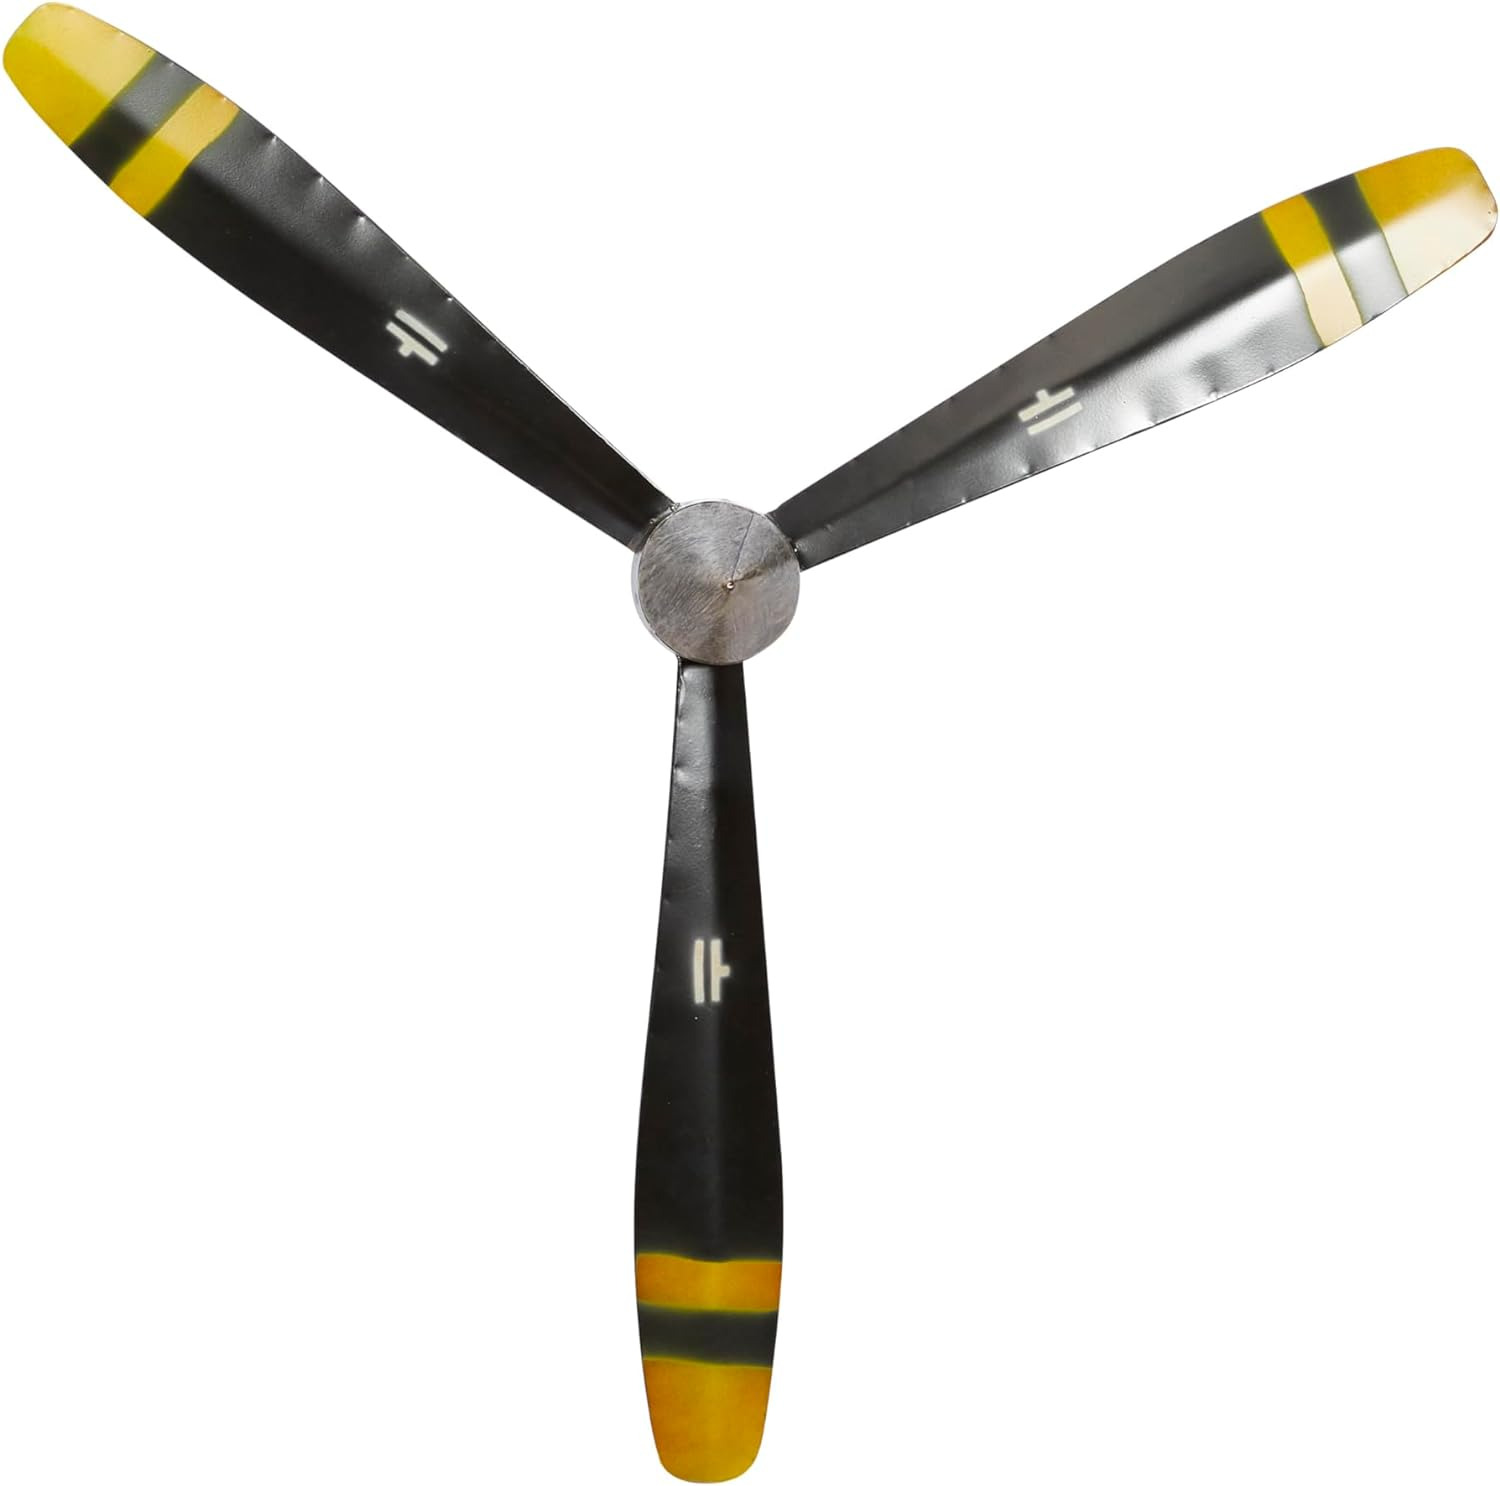 Deco 79 Metal Airplane Propeller Home Decor 3 Blade Wall Sculpture with Aviation